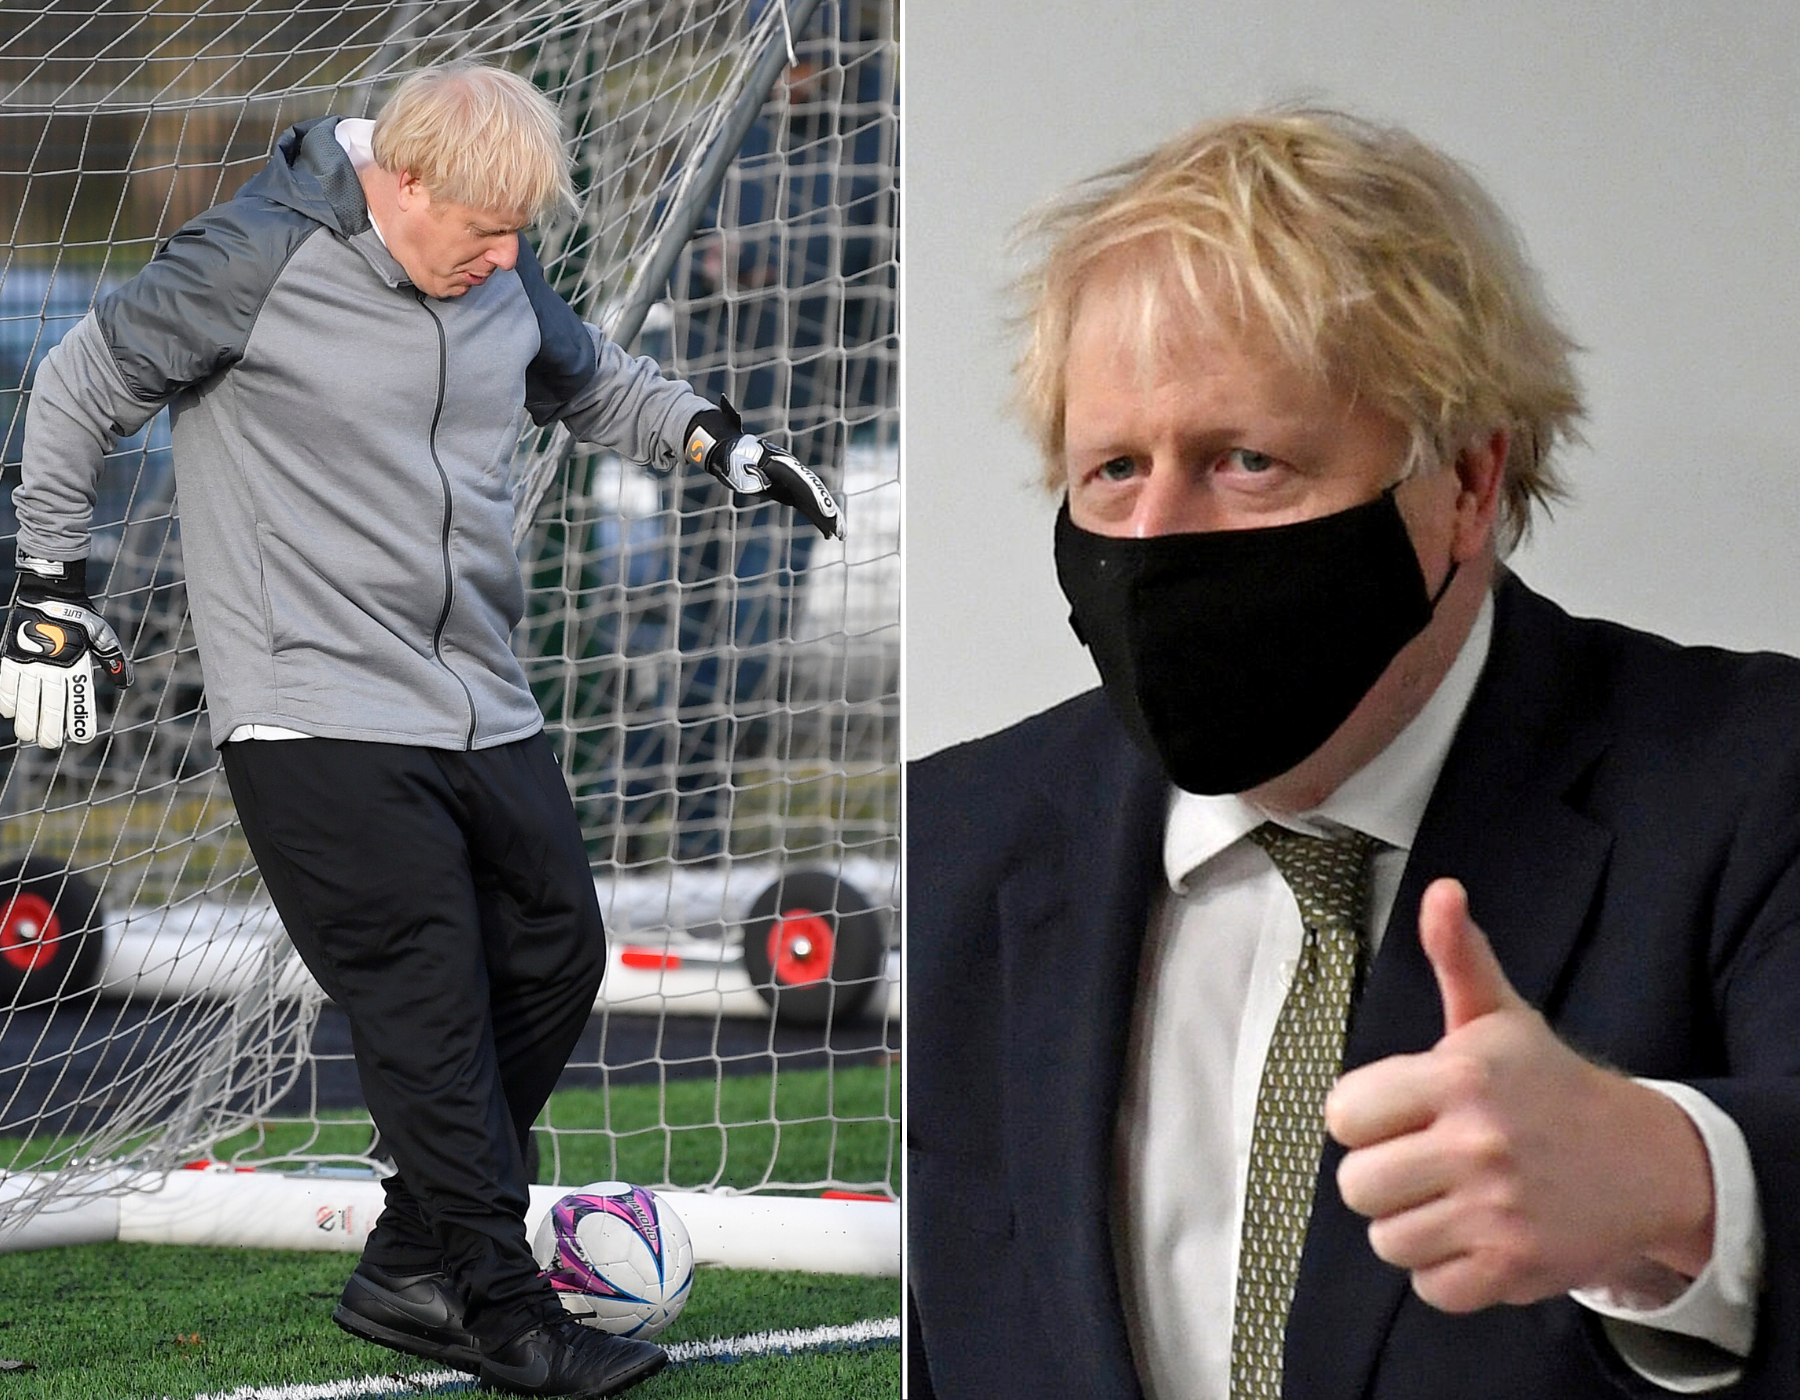 The faces of Conservative MPs and councillors grow more ashen as Boris Johnson continues to kick the can down the road